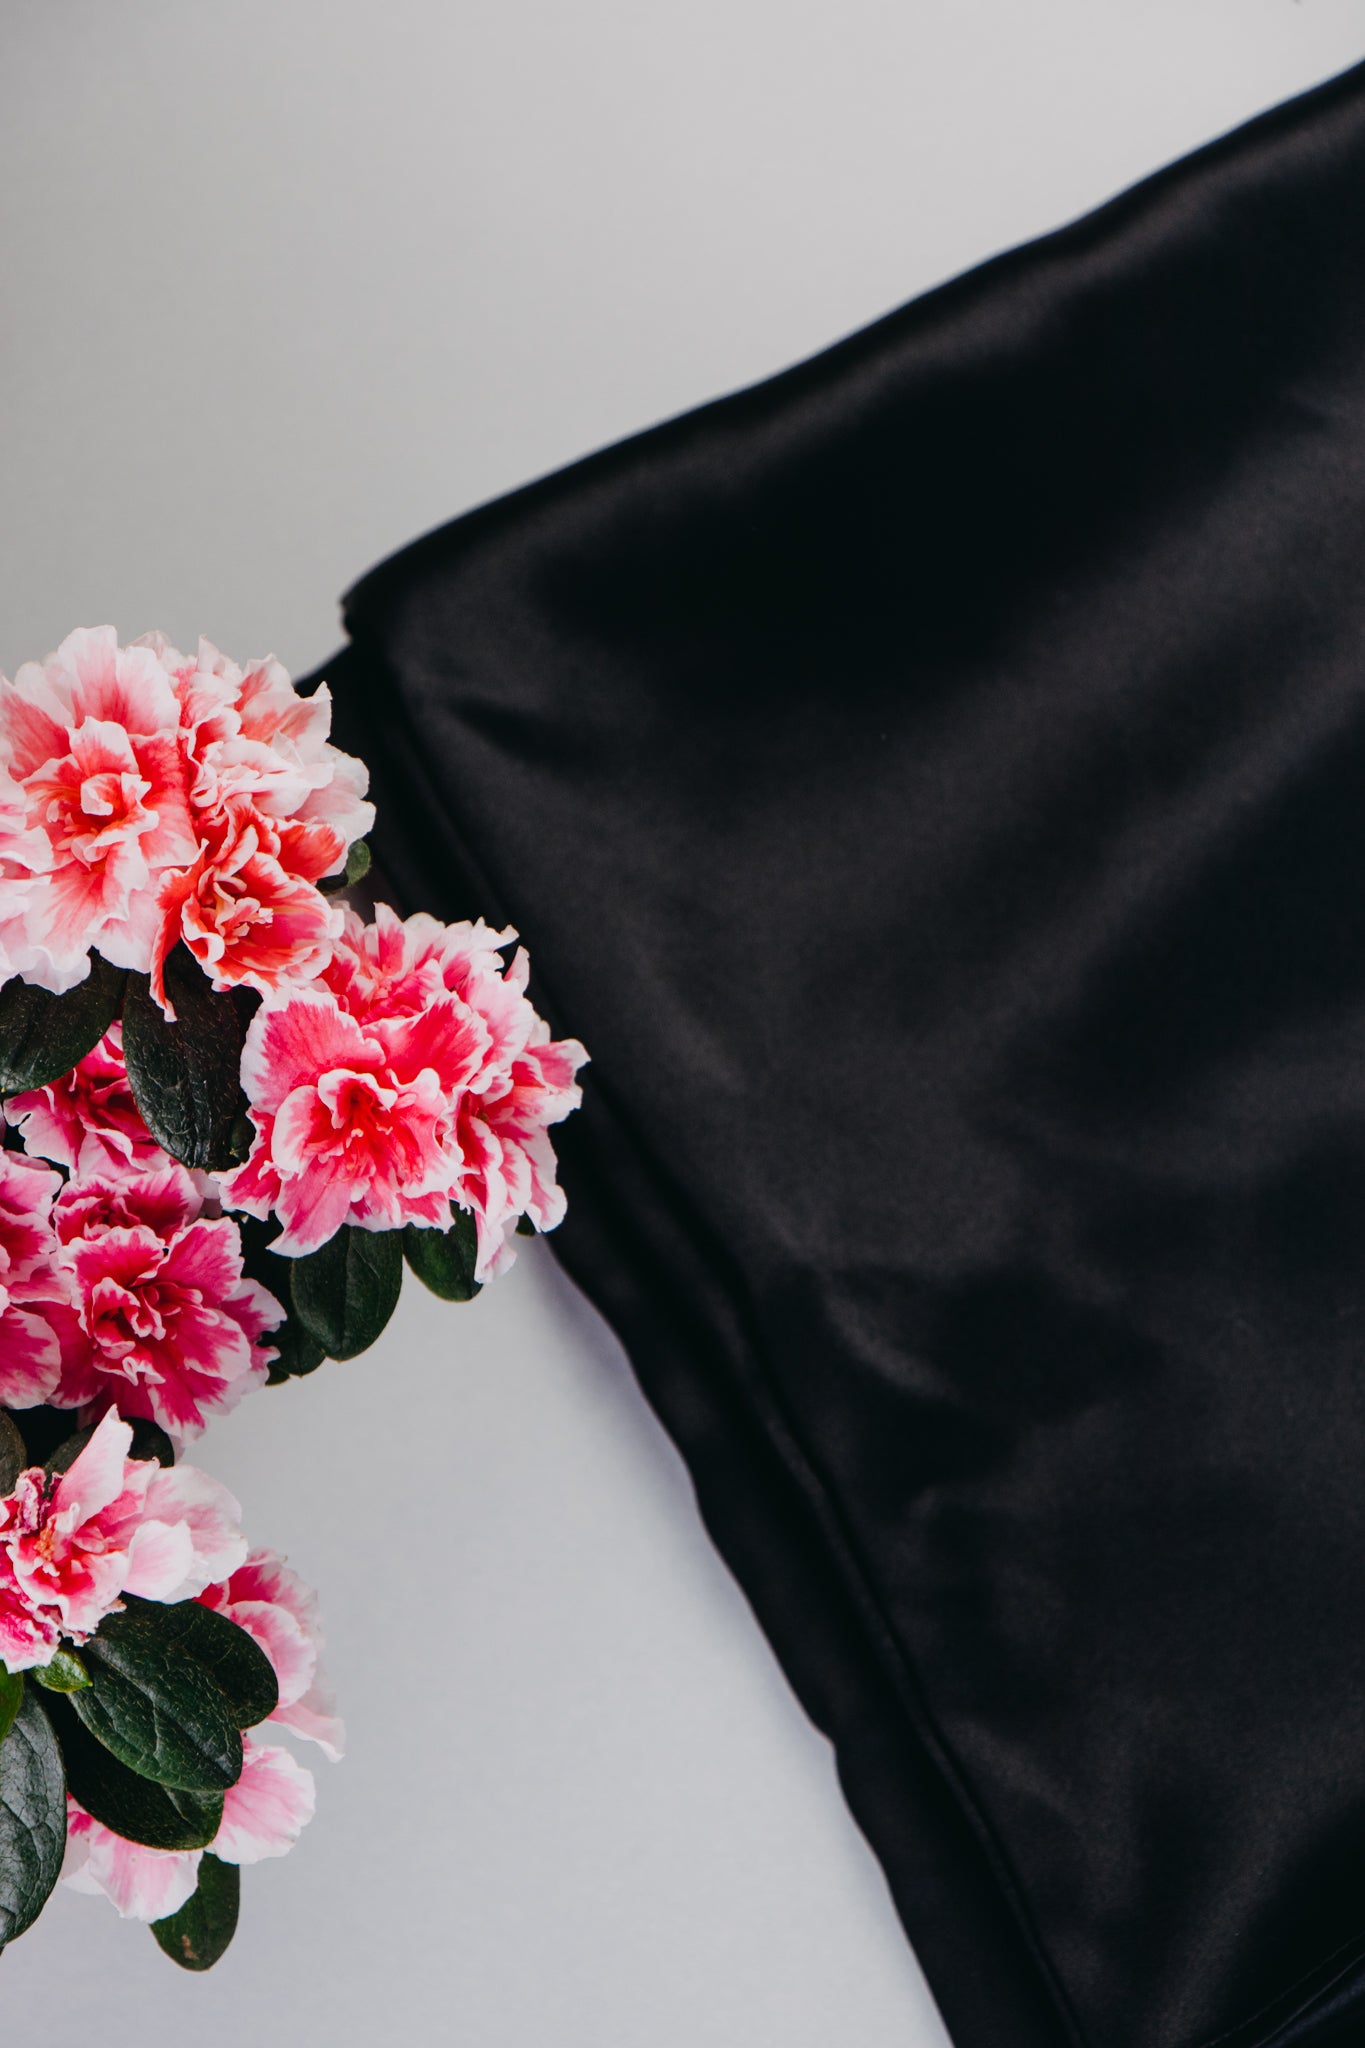 black pillowcase with pink flowers by side